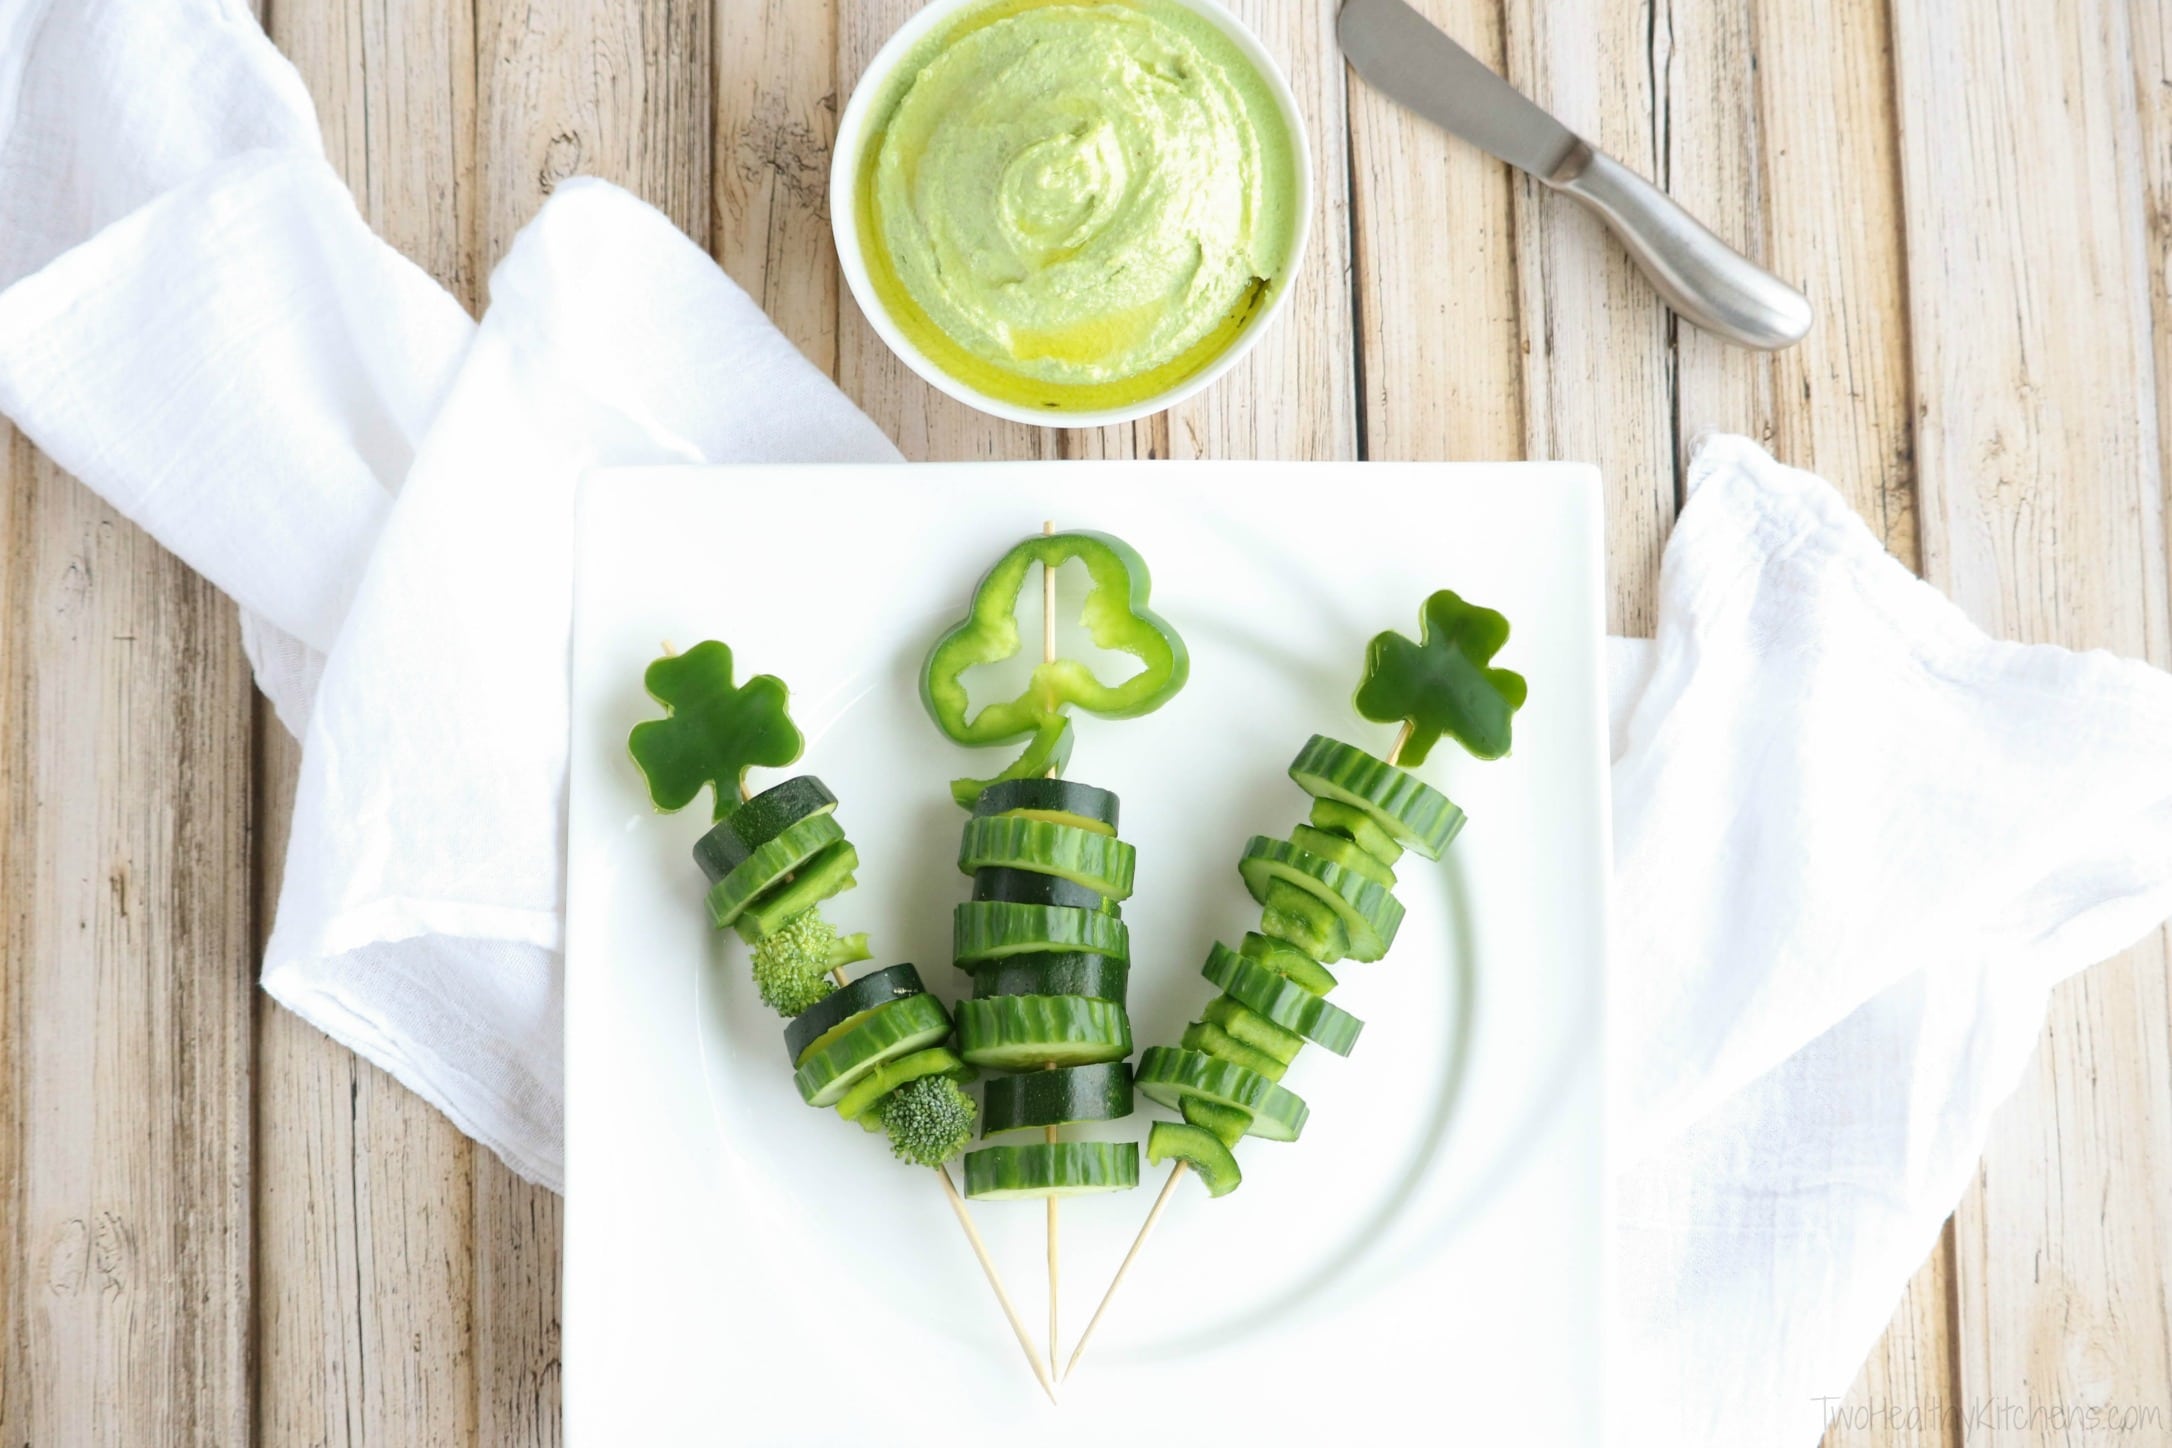 These easy Shamrock Veggie Skewers are a perfect St. Patrick's Day appetizer for parties - and a fun, healthy after-school snack! | www.TwoHealthyKitchens.com